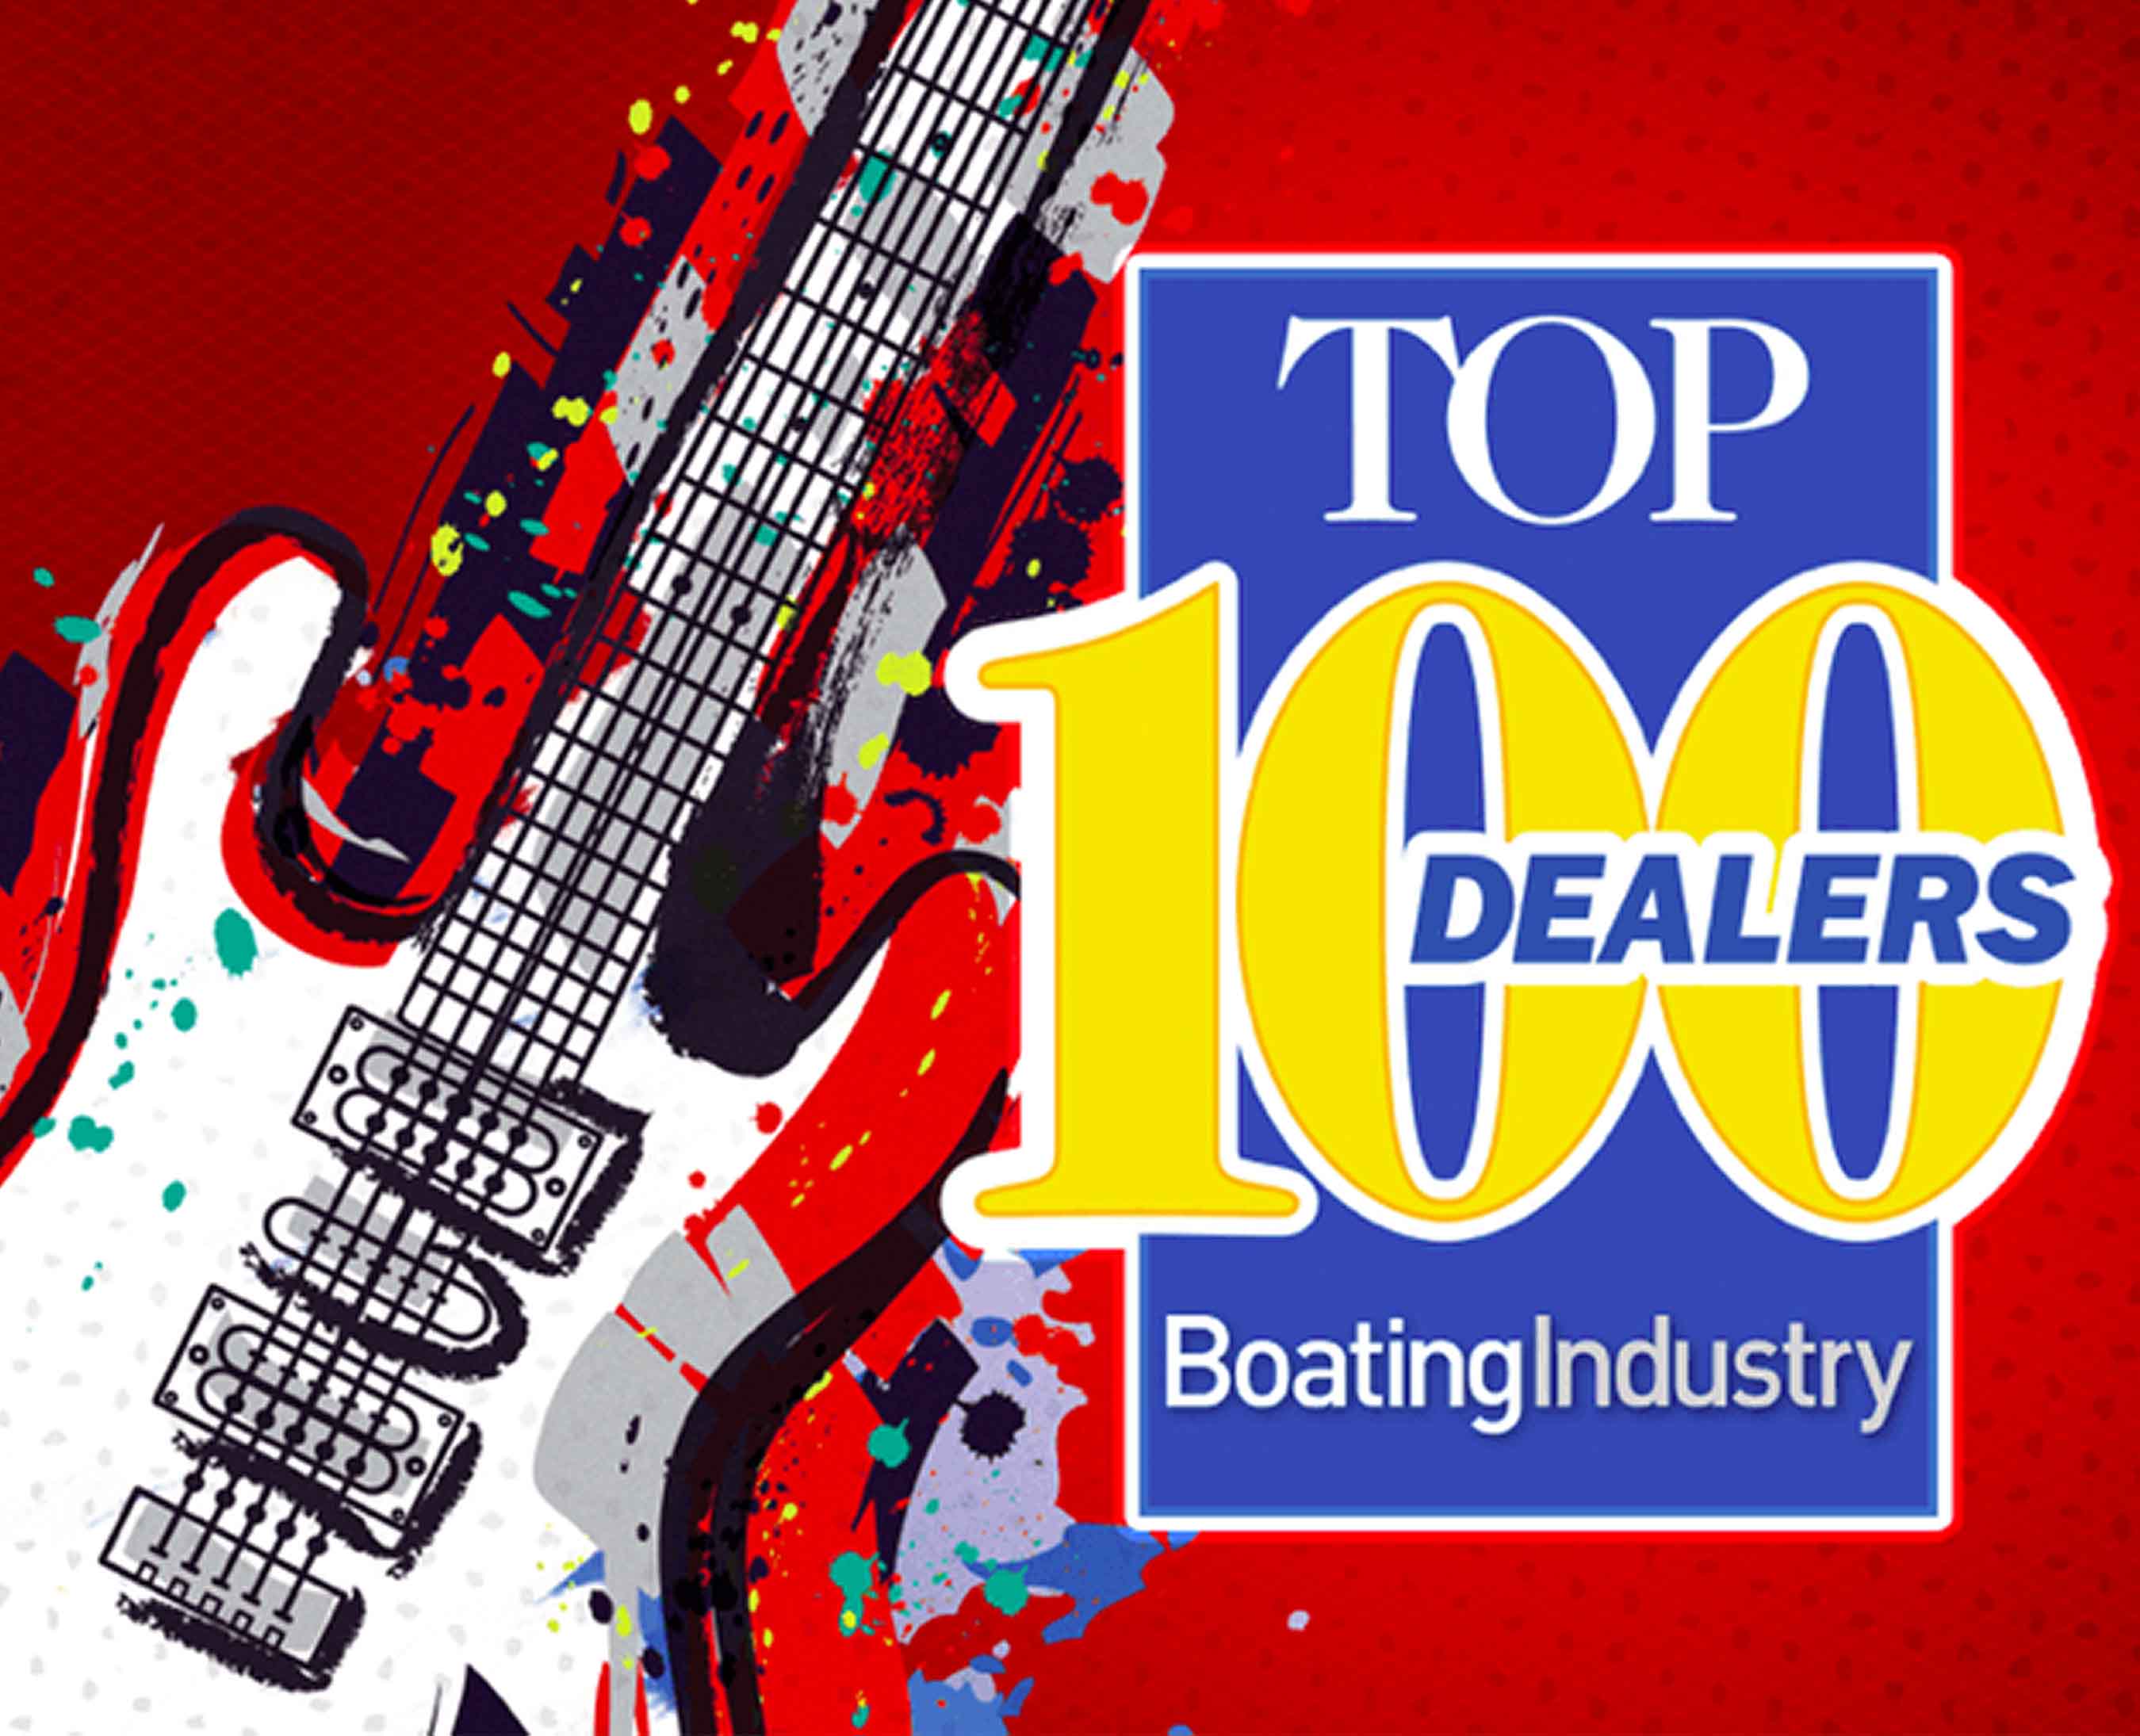 Why dealers apply for the Top 100